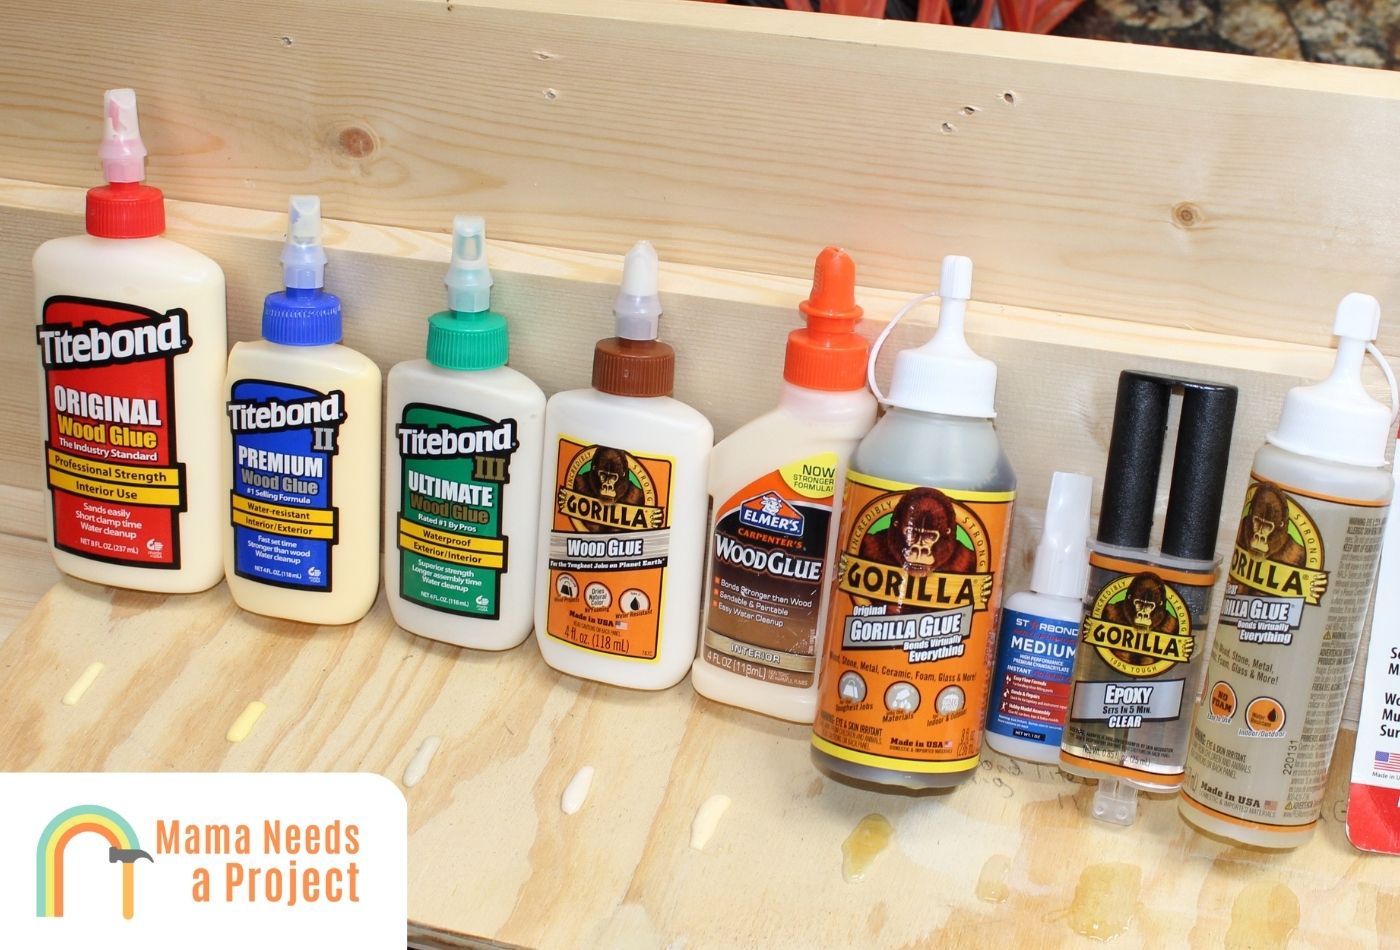 What Color Does Wood Glue Dry?